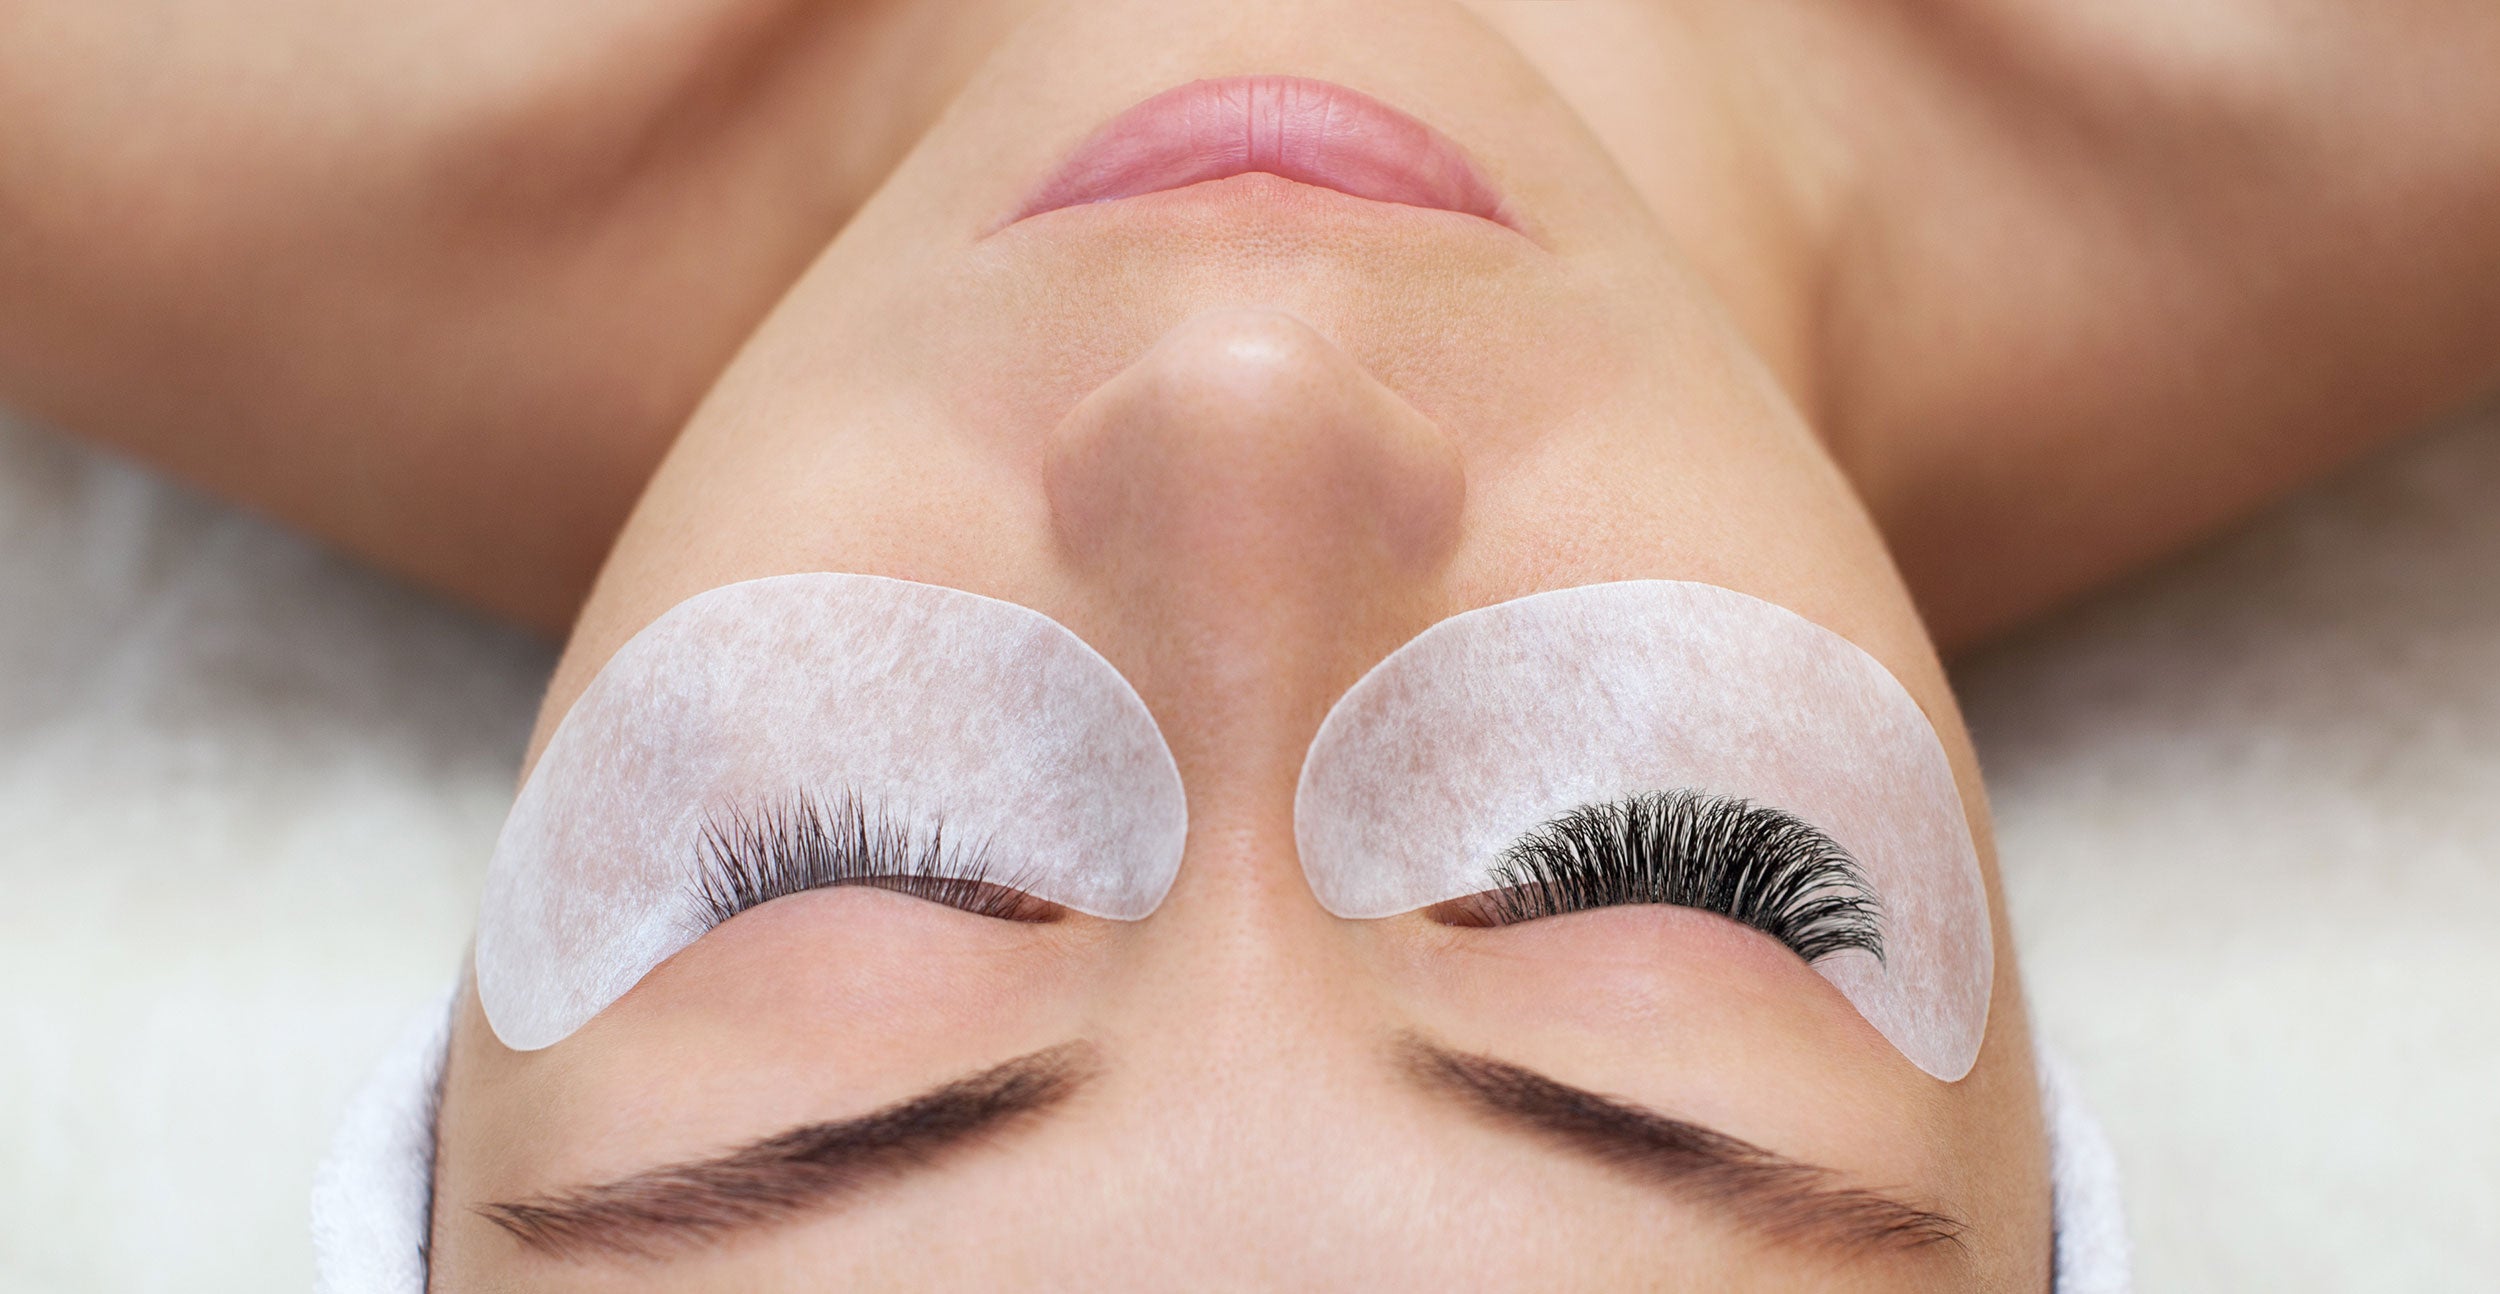 Face Aesthetics - Lashes and brow treatments